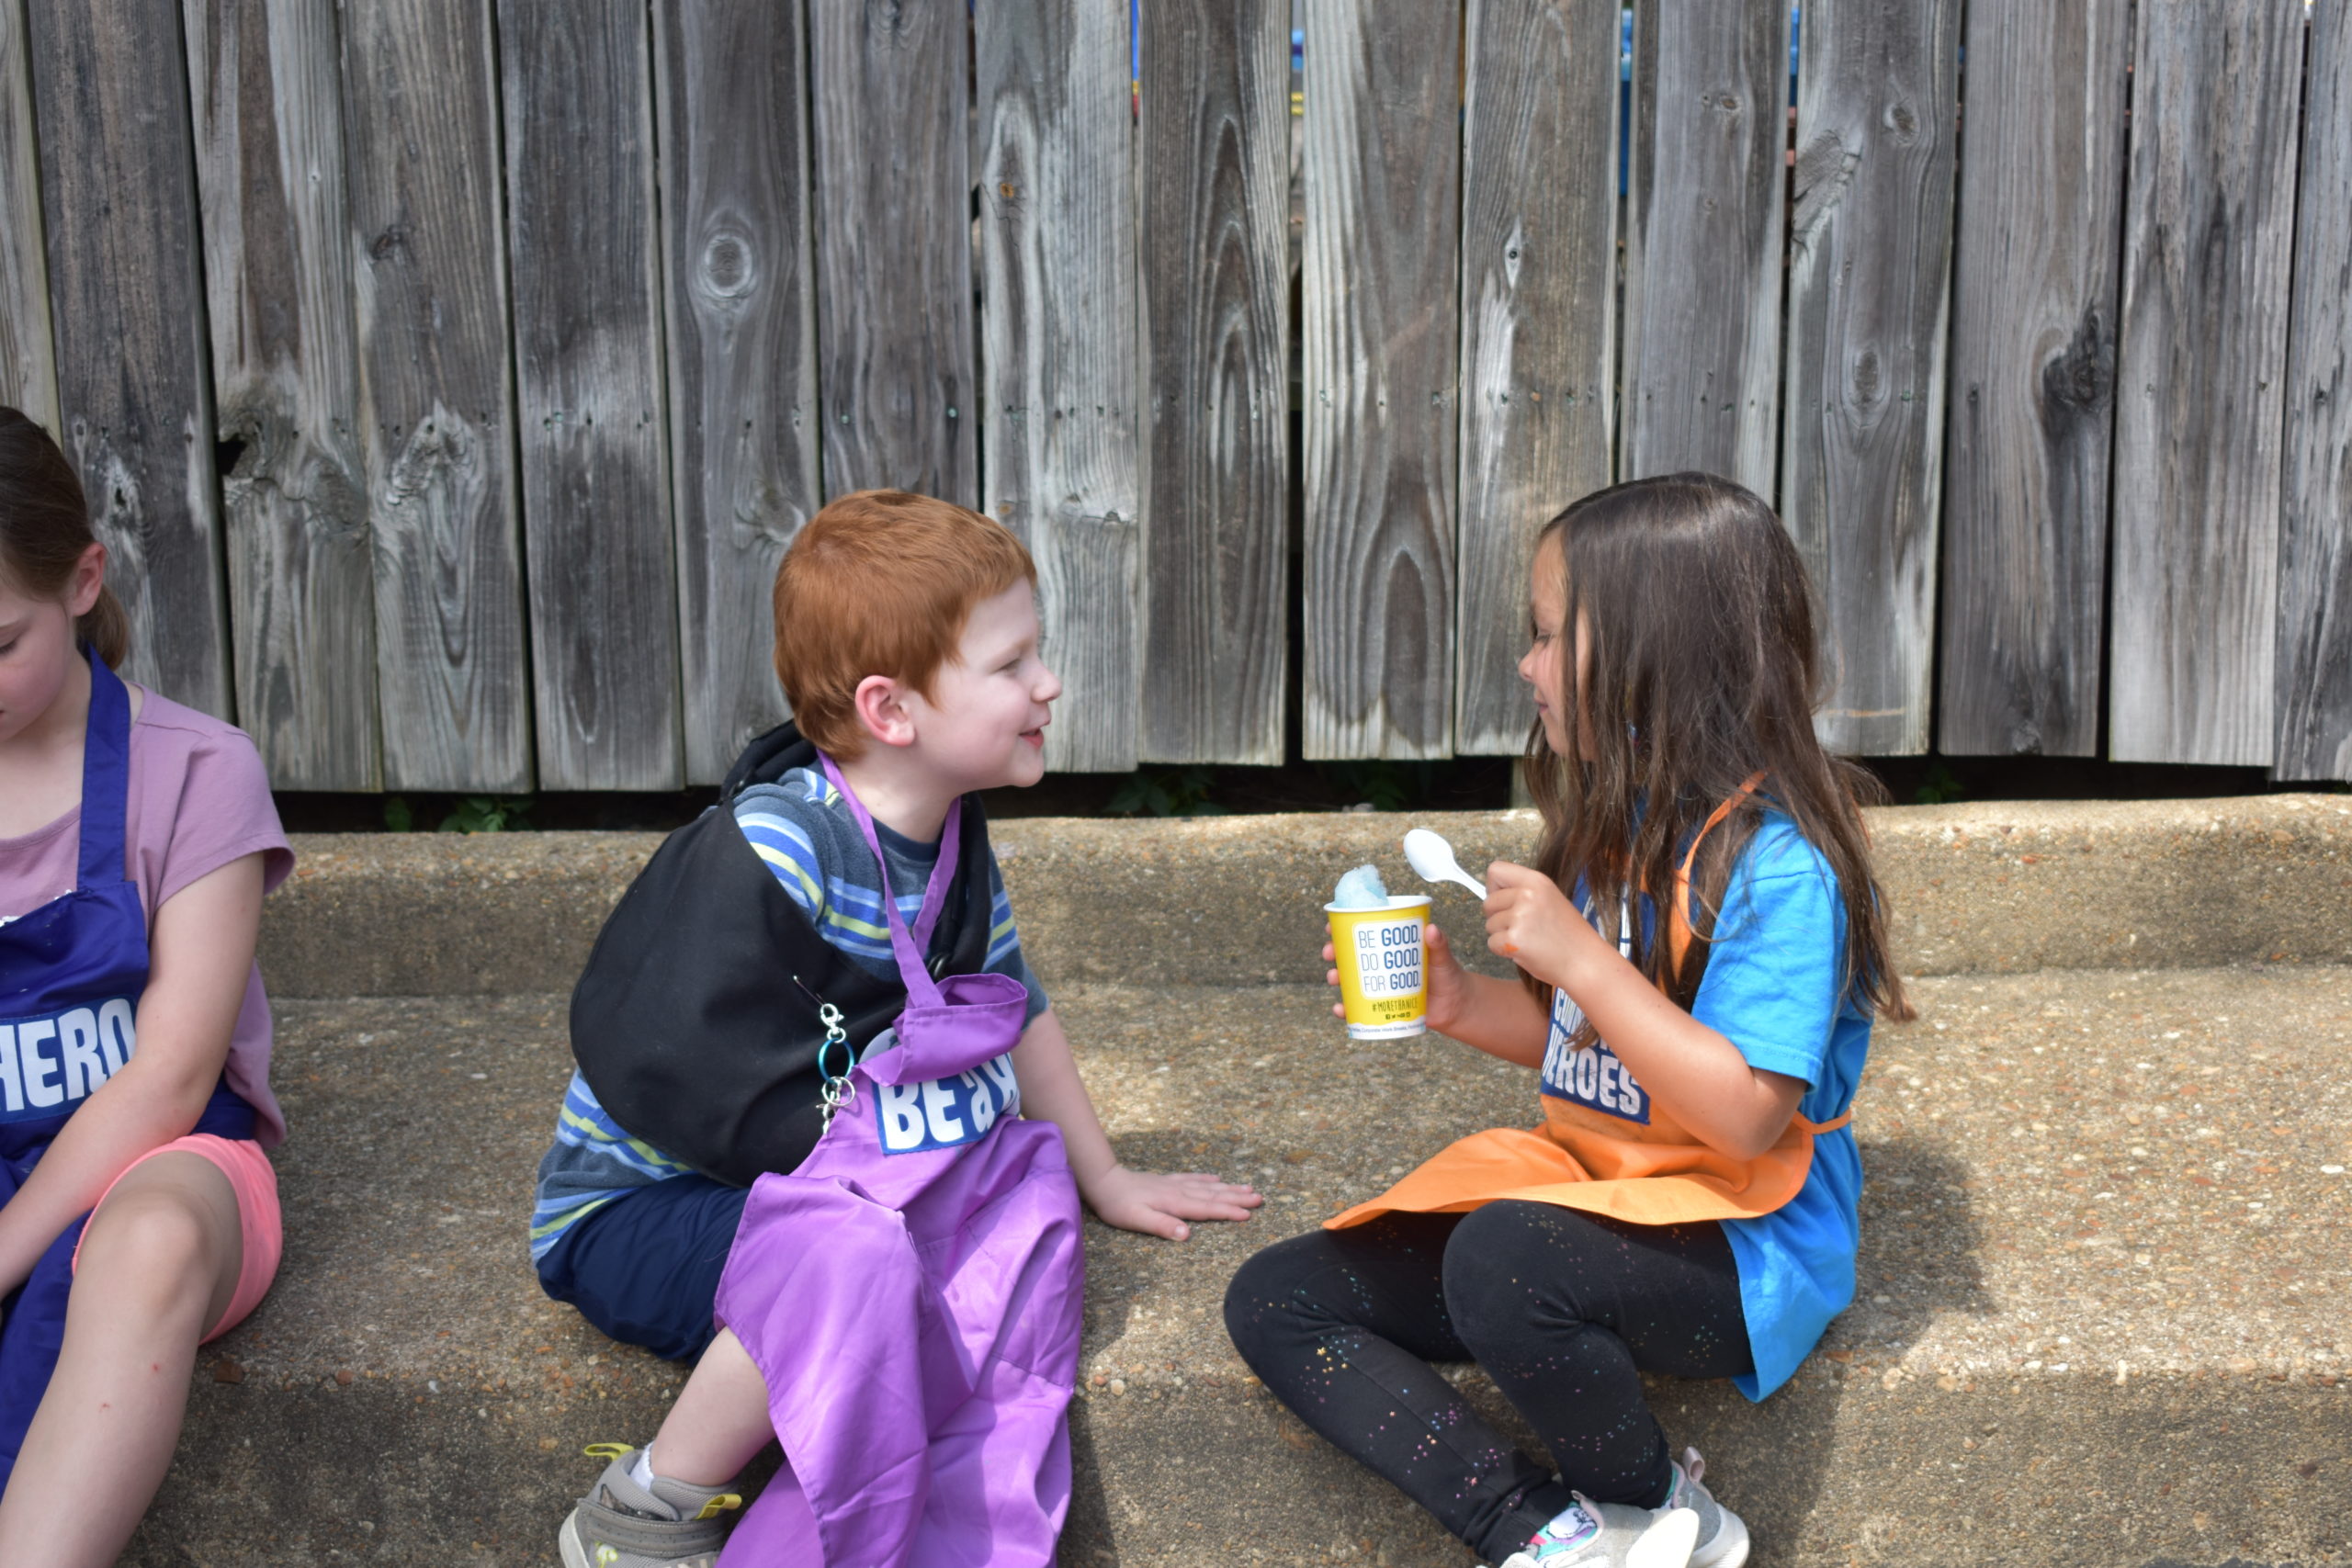 Two children sitting outside on a curb eating ice cream